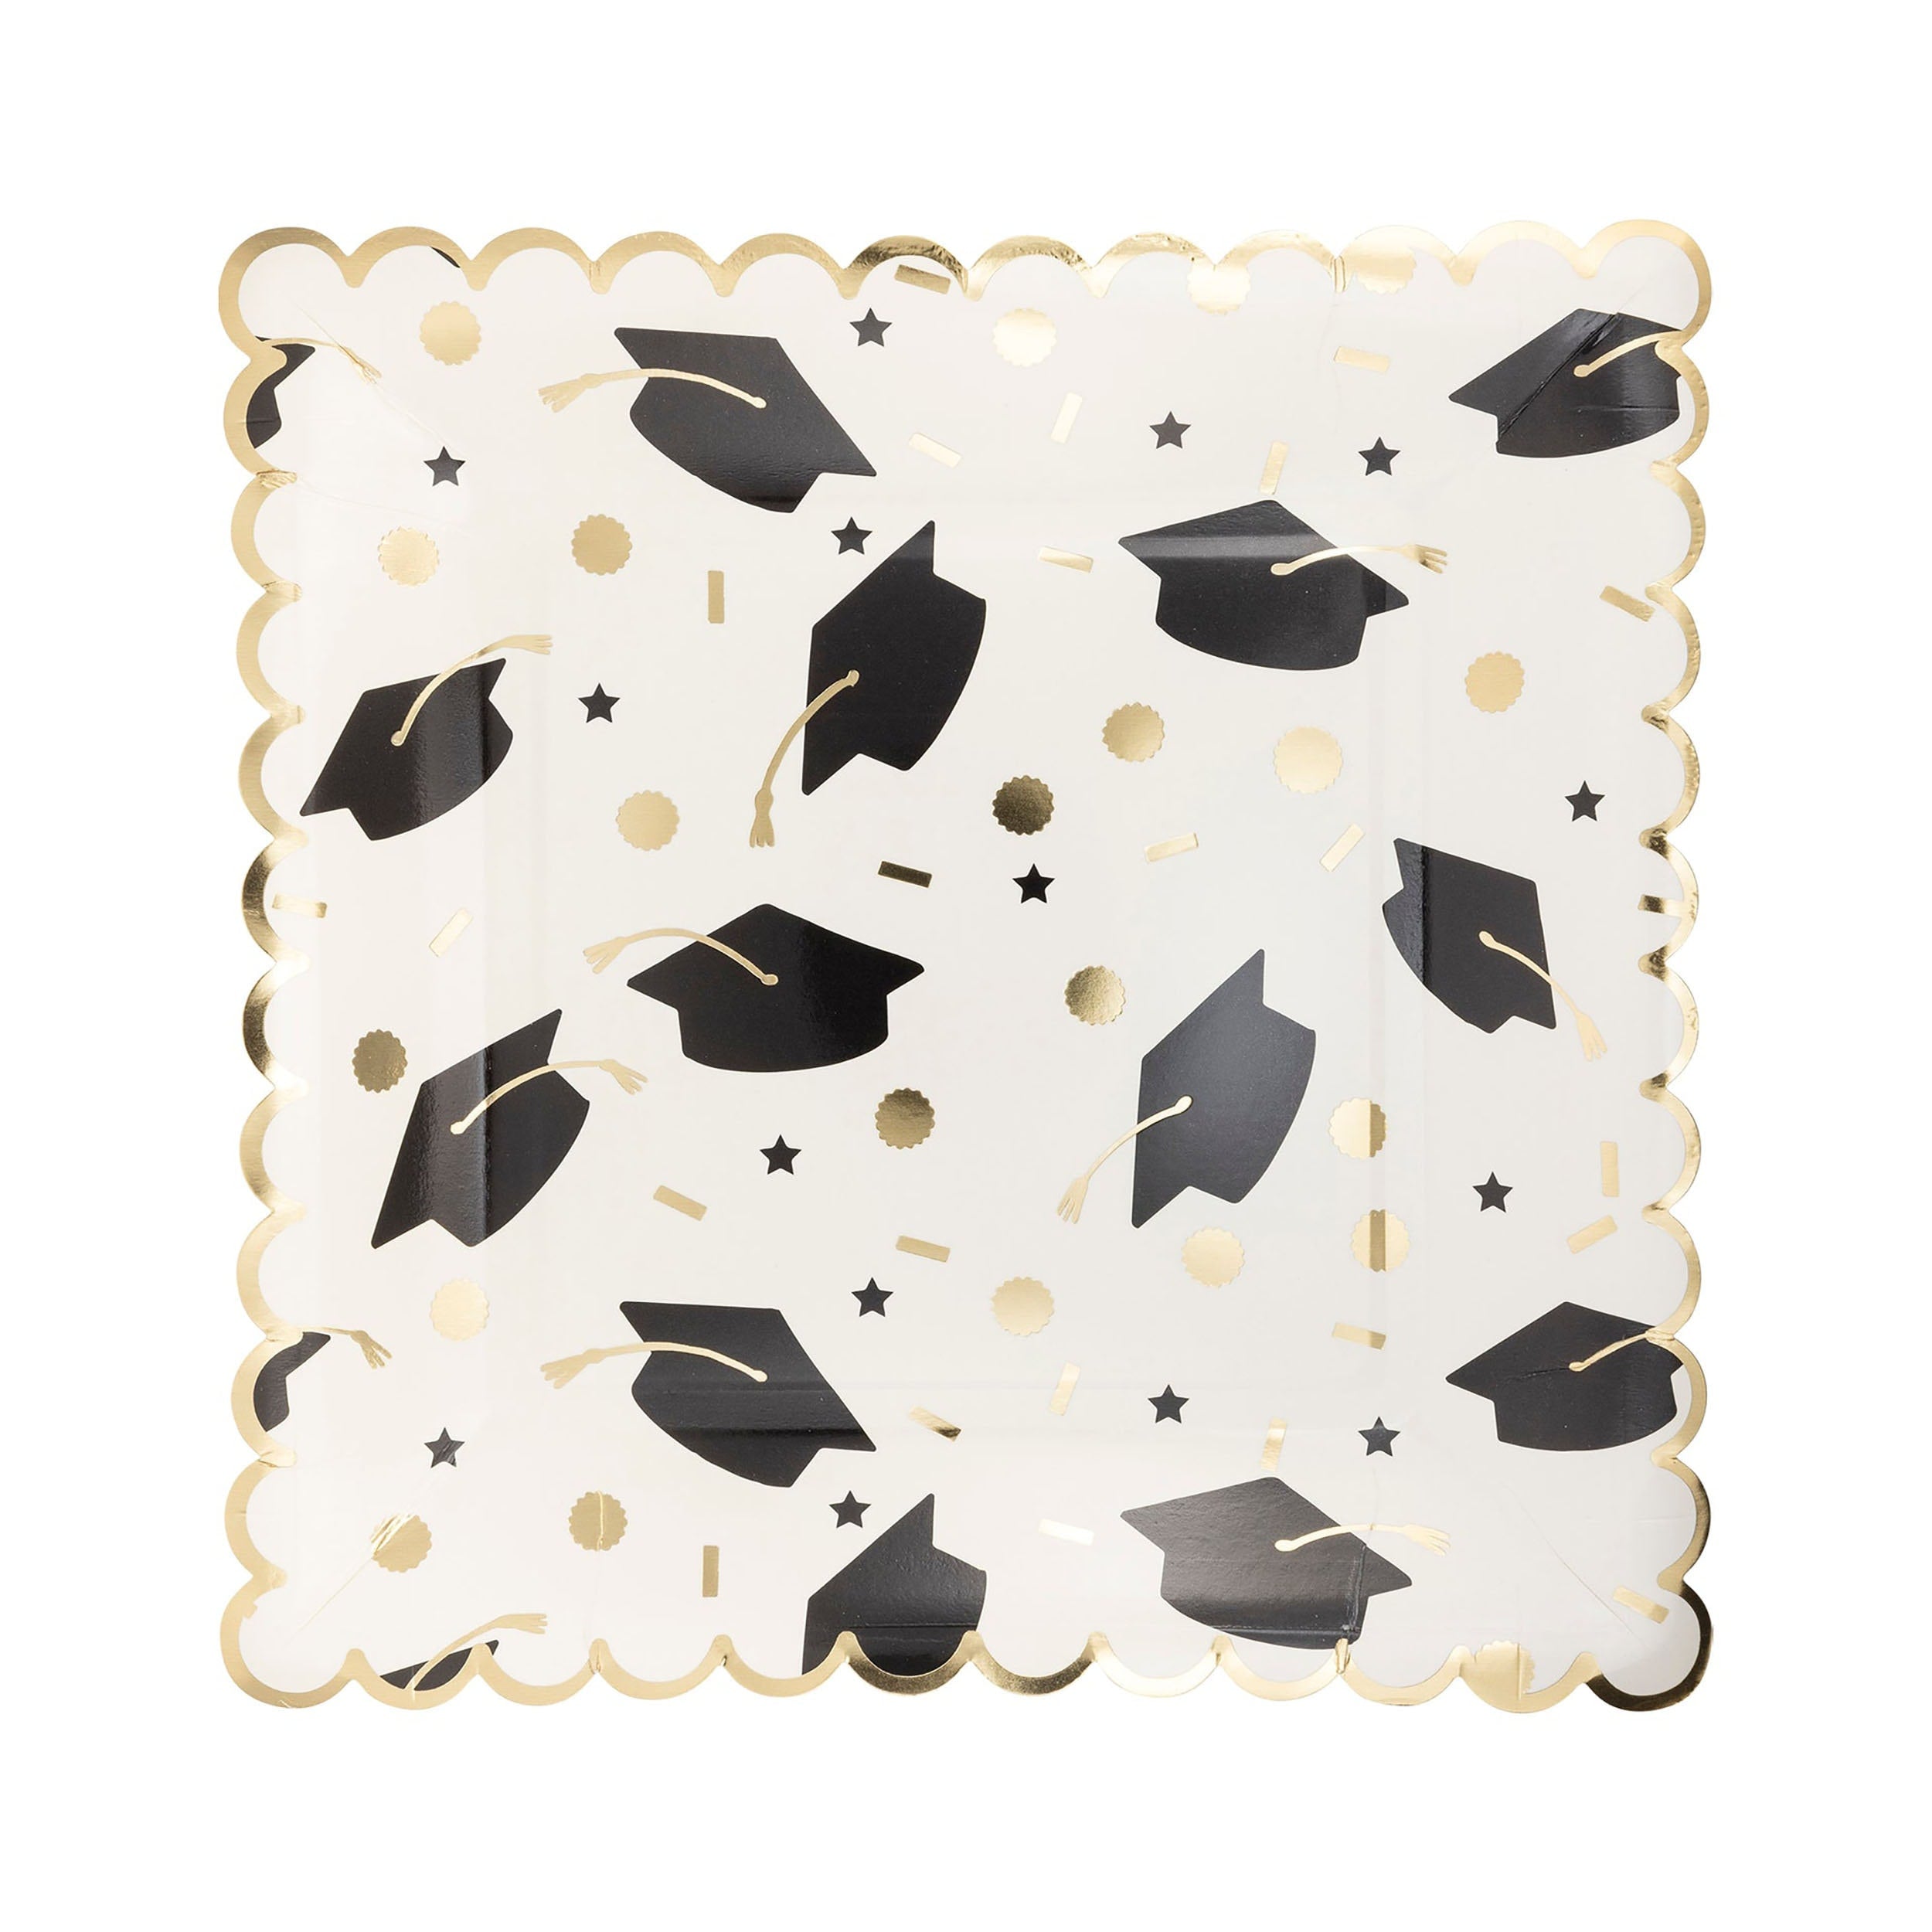 Graduation Party Paper Plates, Square with Gold Scallop Edging. Design depicts Grad Cap Toss, with diploma seals, confetti & stars